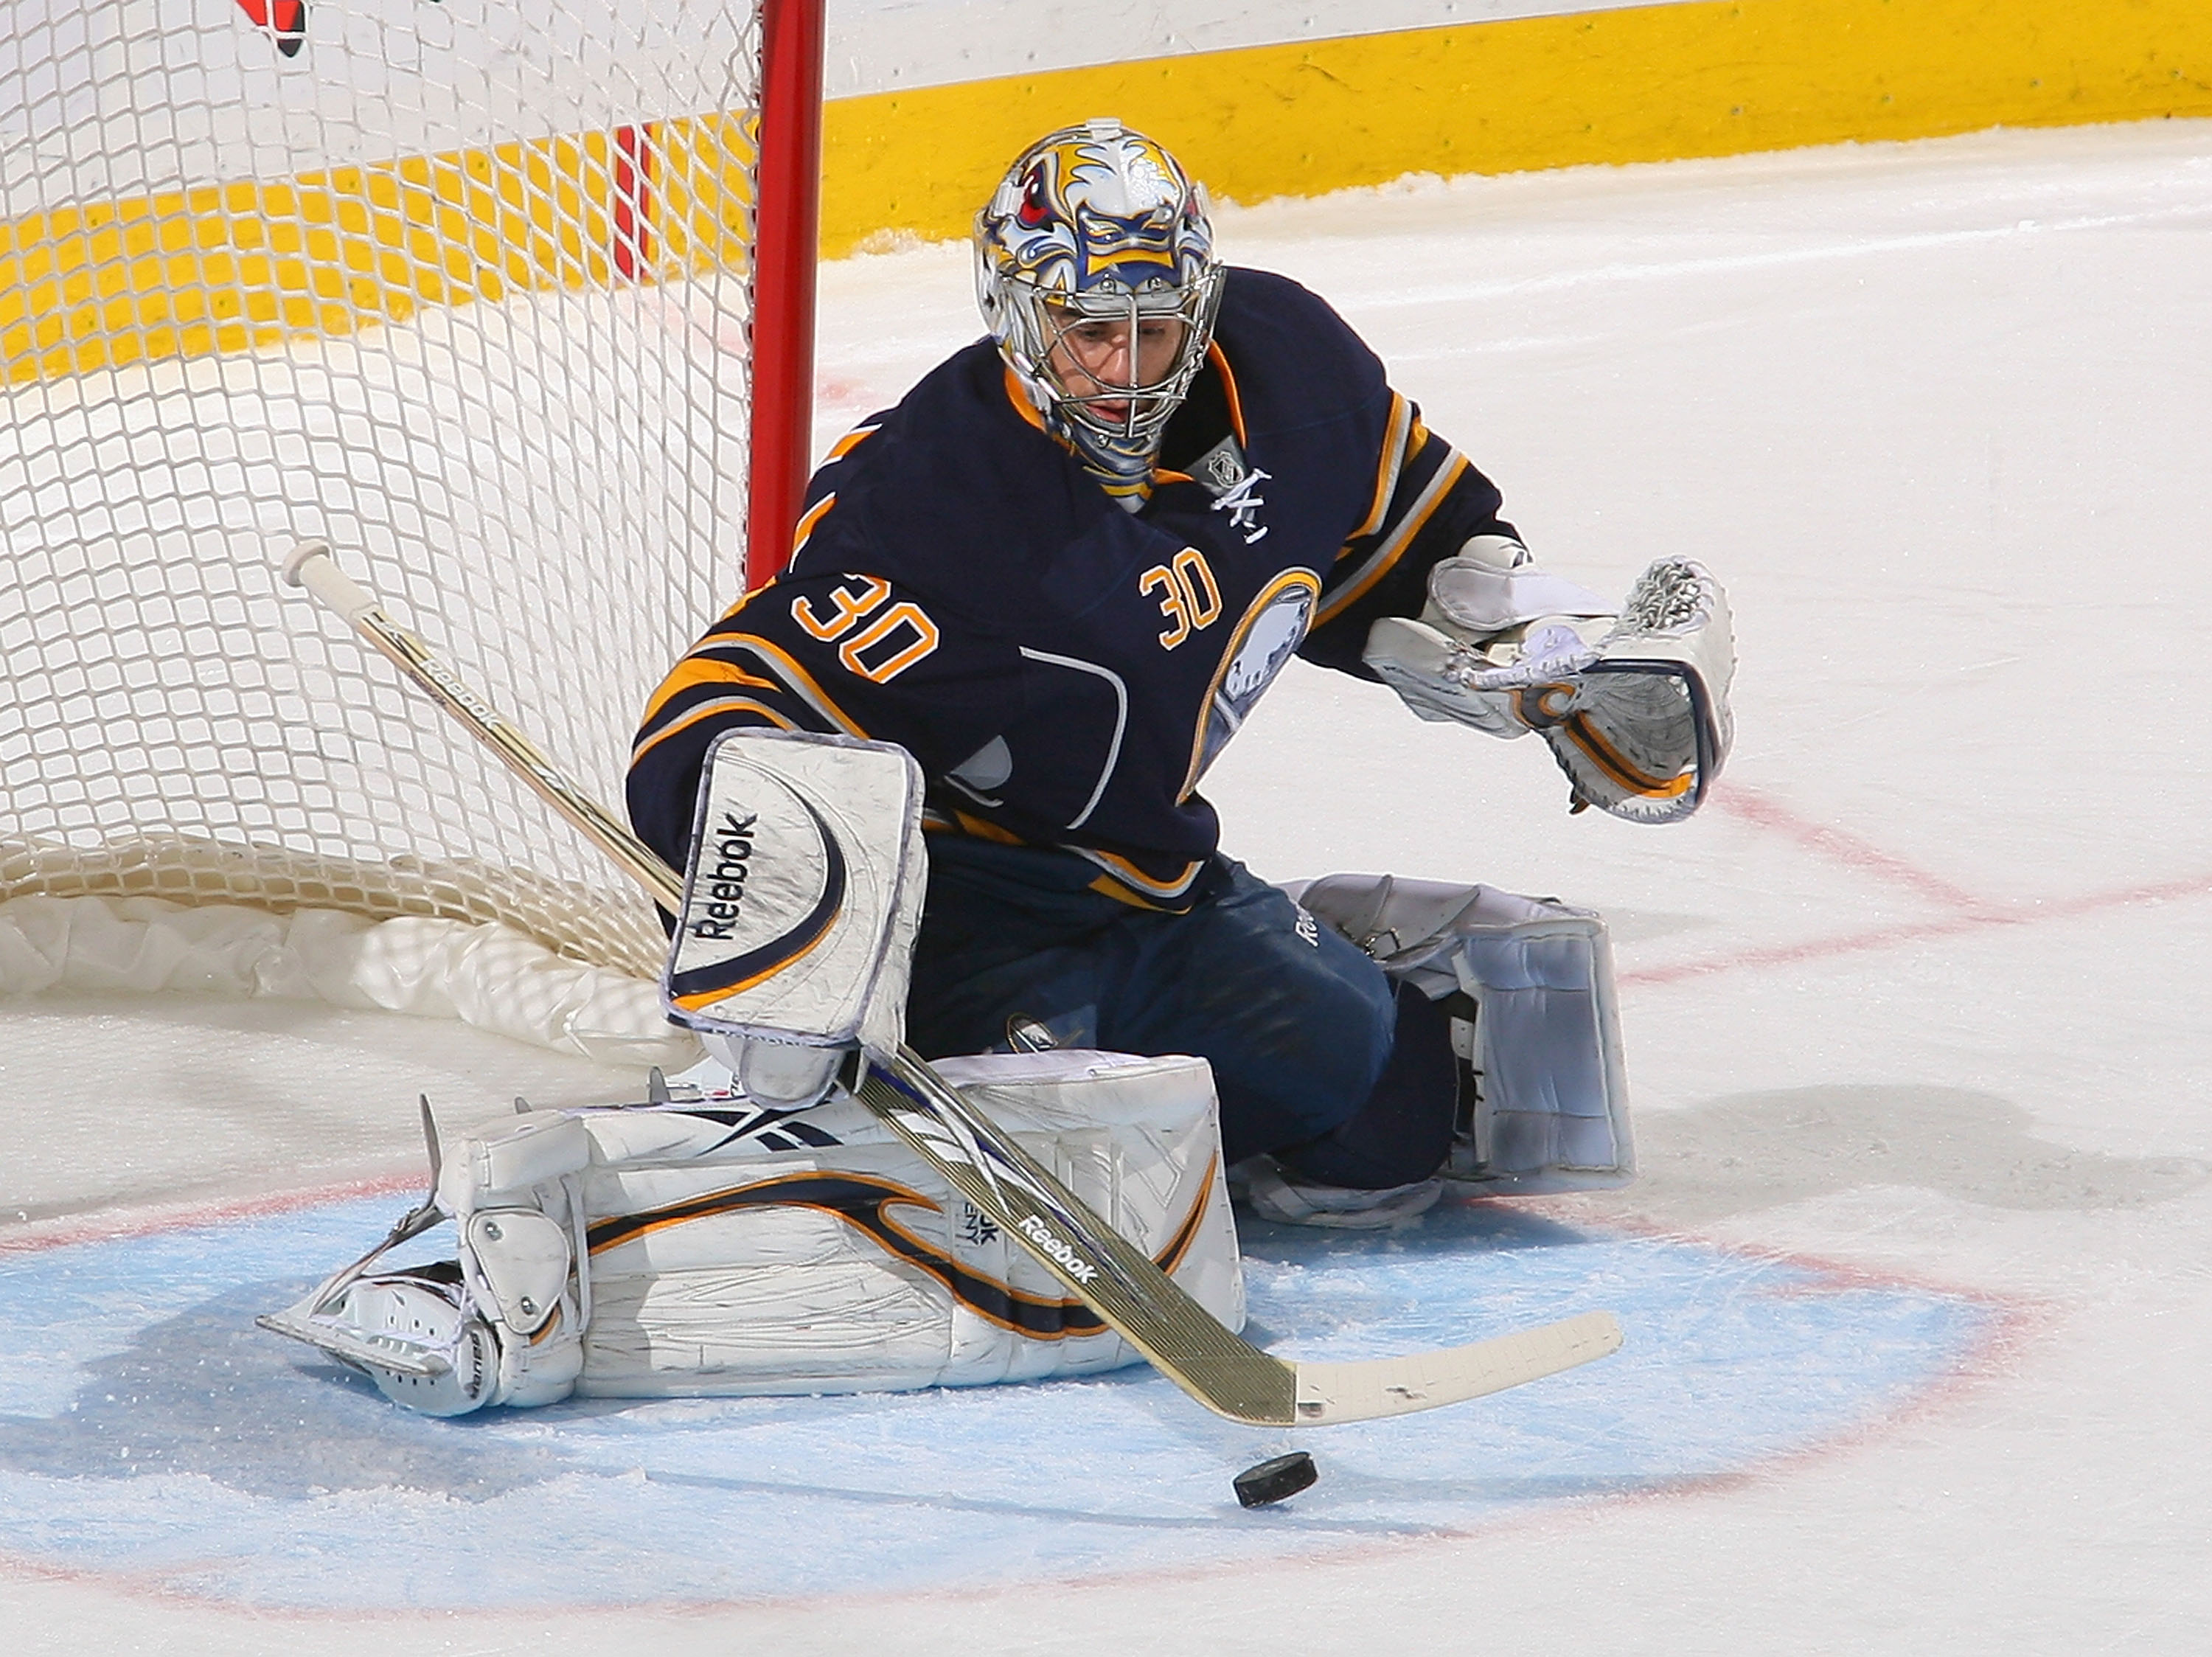 BUFFALO, NY - MARCH 20: Ryan Miller #30 of the Buffalo Sabres makes a save against the Nashville Predators at HSBC Arena on March 20, 2011 in Buffalo, New York.  (Photo by Rick Stewart/Getty Images)